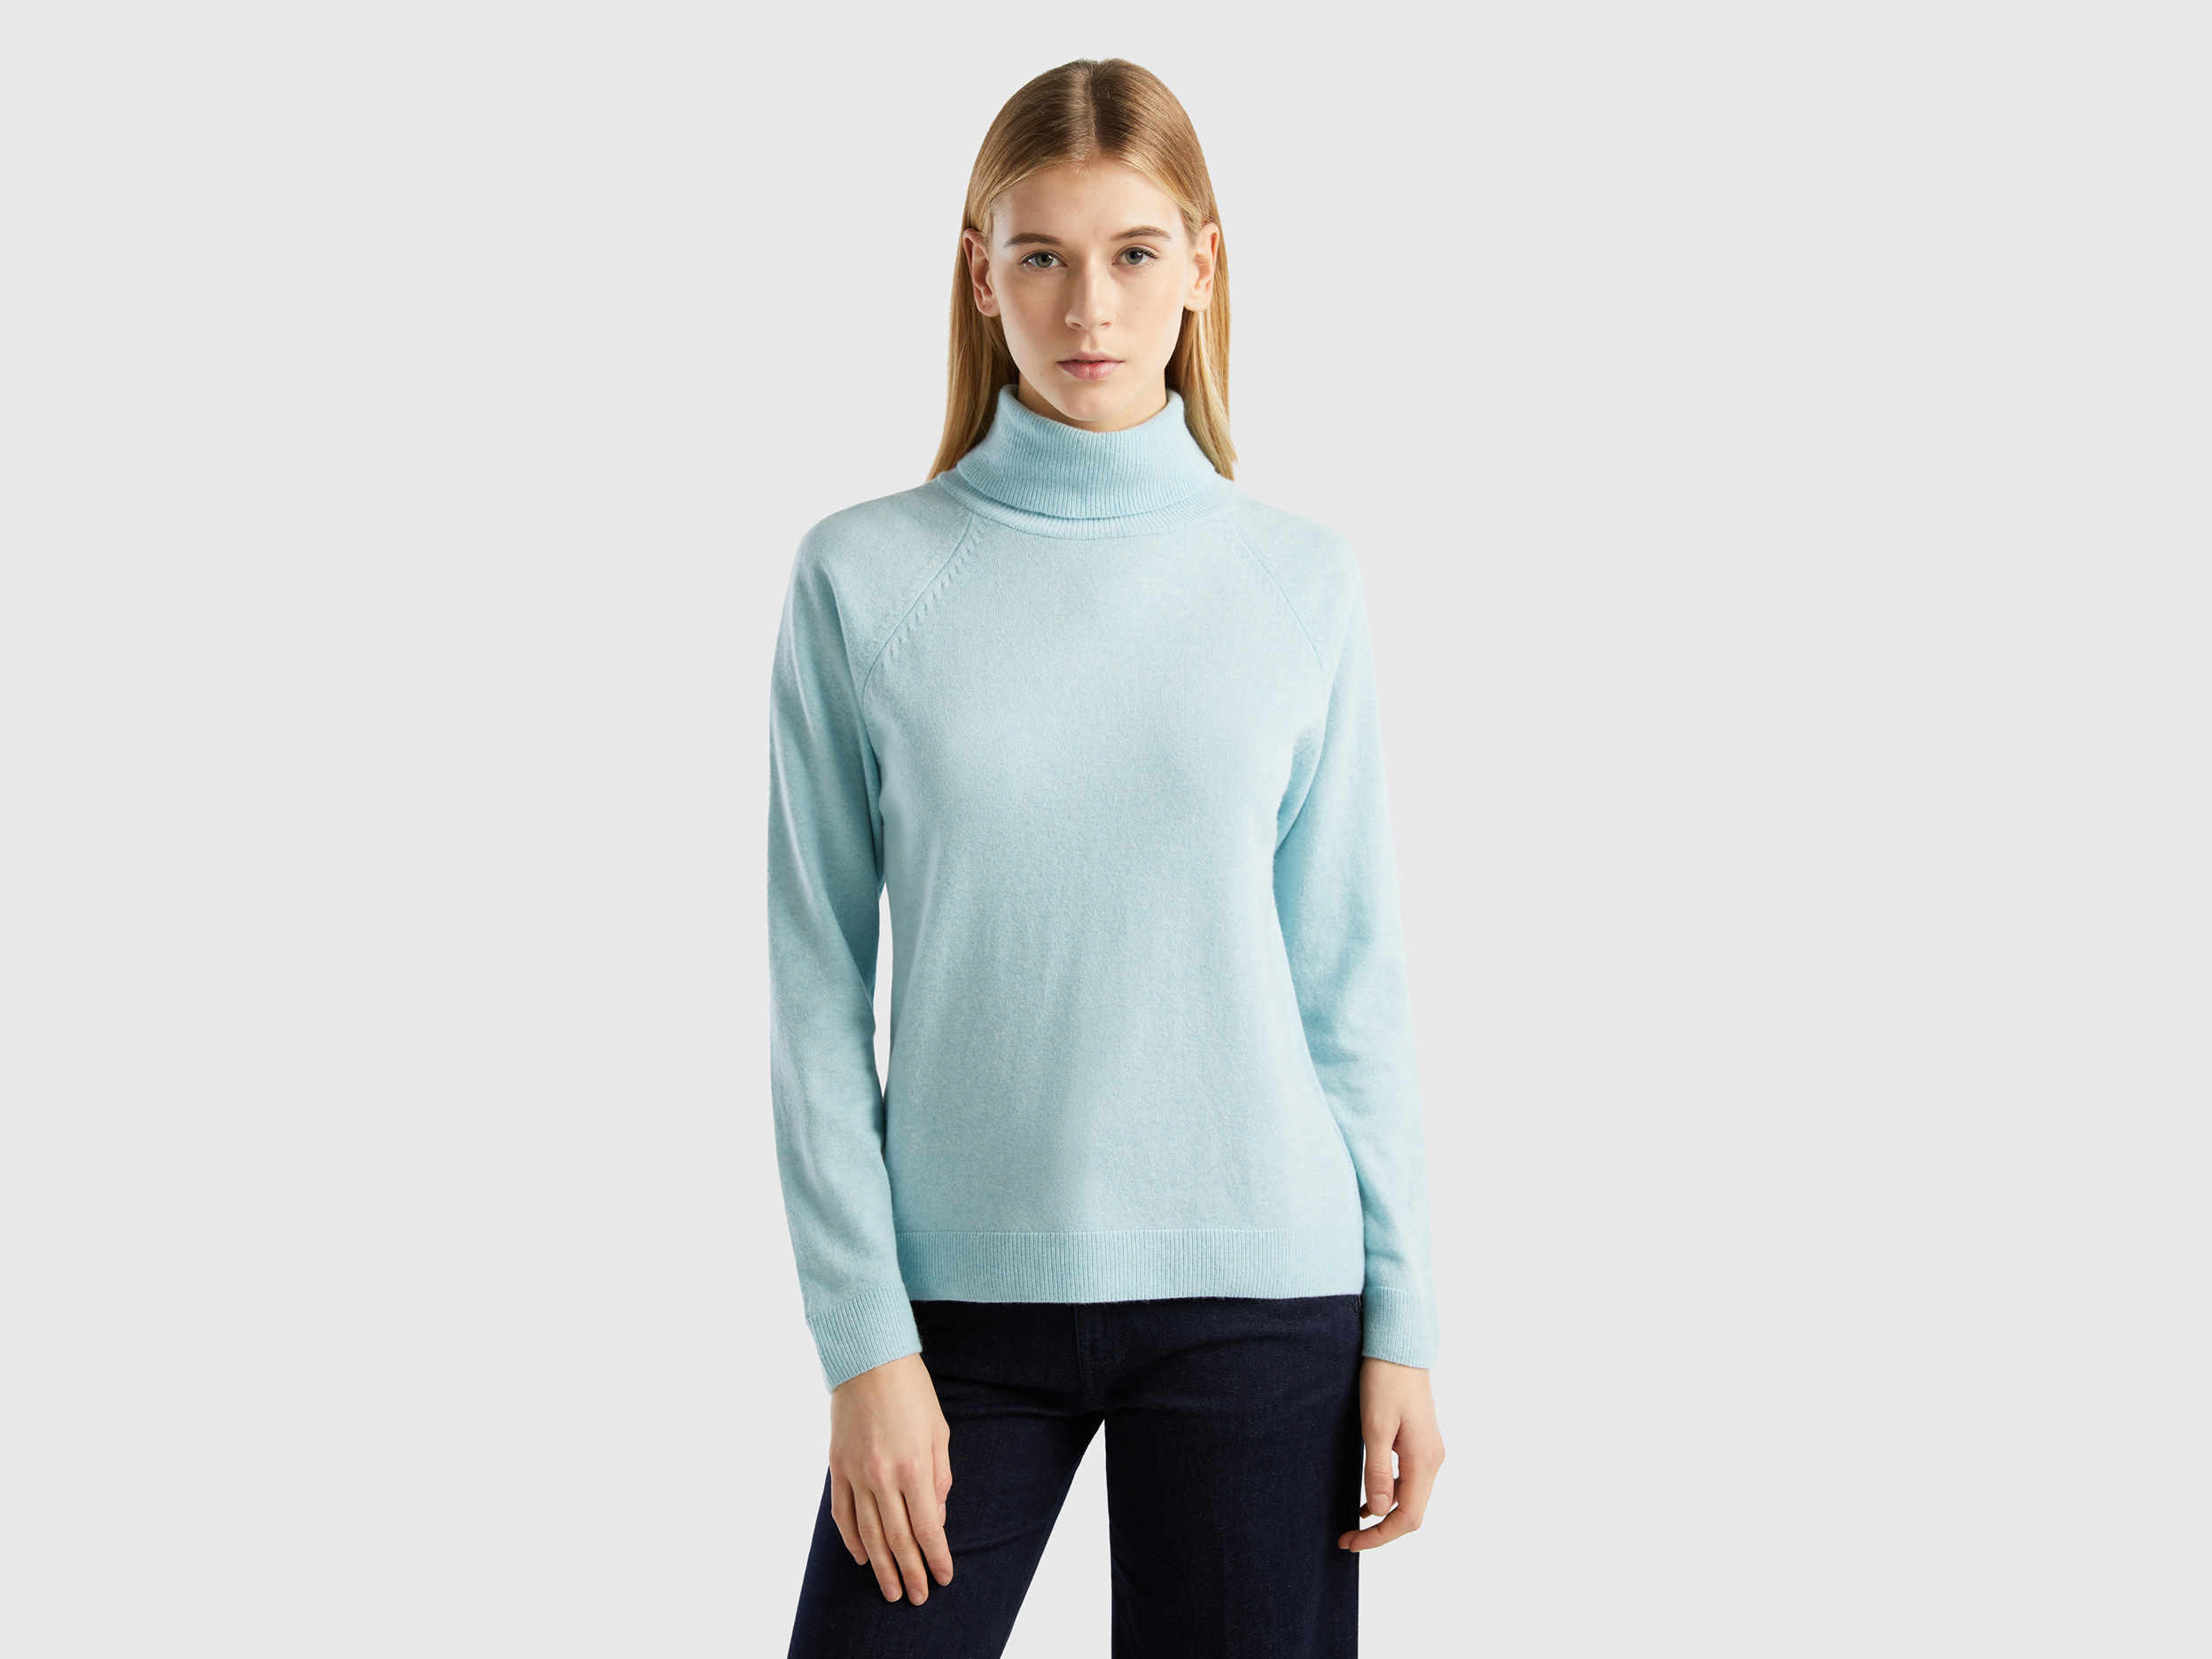 Benetton, Light Gray Turtleneck Sweater In Cashmere And Wool Blend, size L, Light Gray, Women